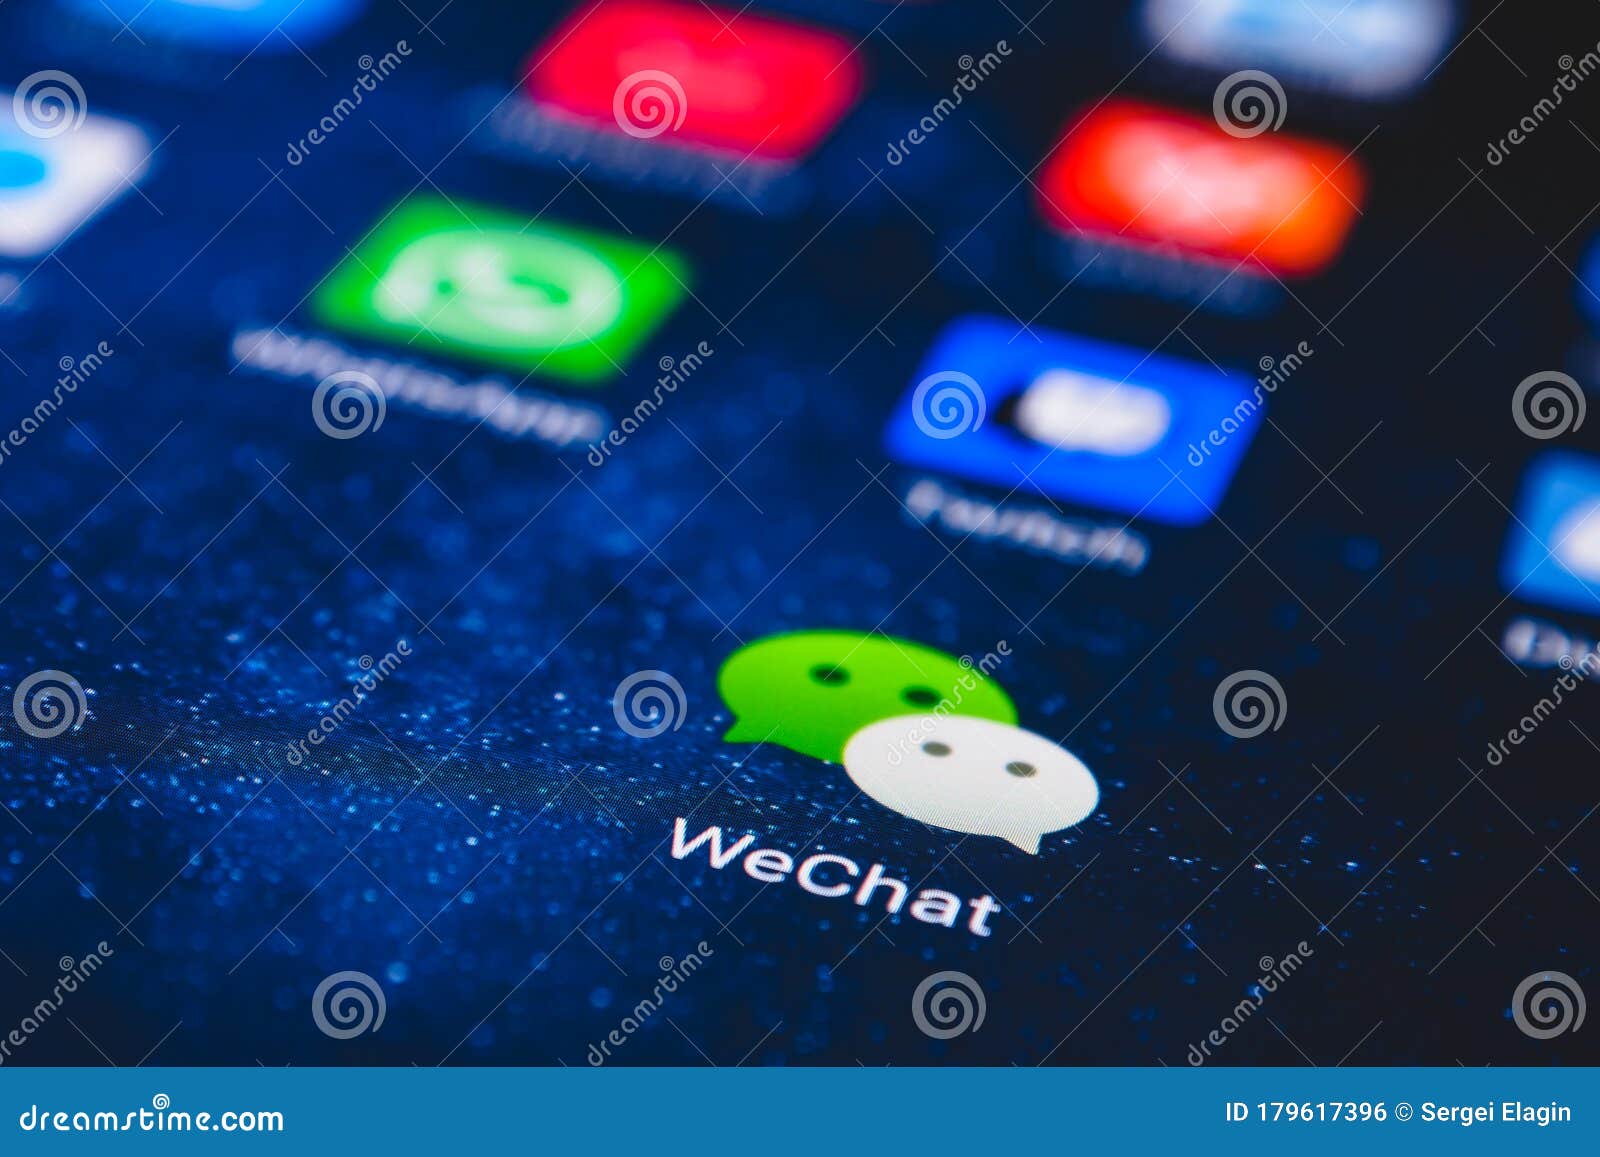 Wechat App Icon On The Screen Smartphone Editorial Photo Image Of Network Application 179617396